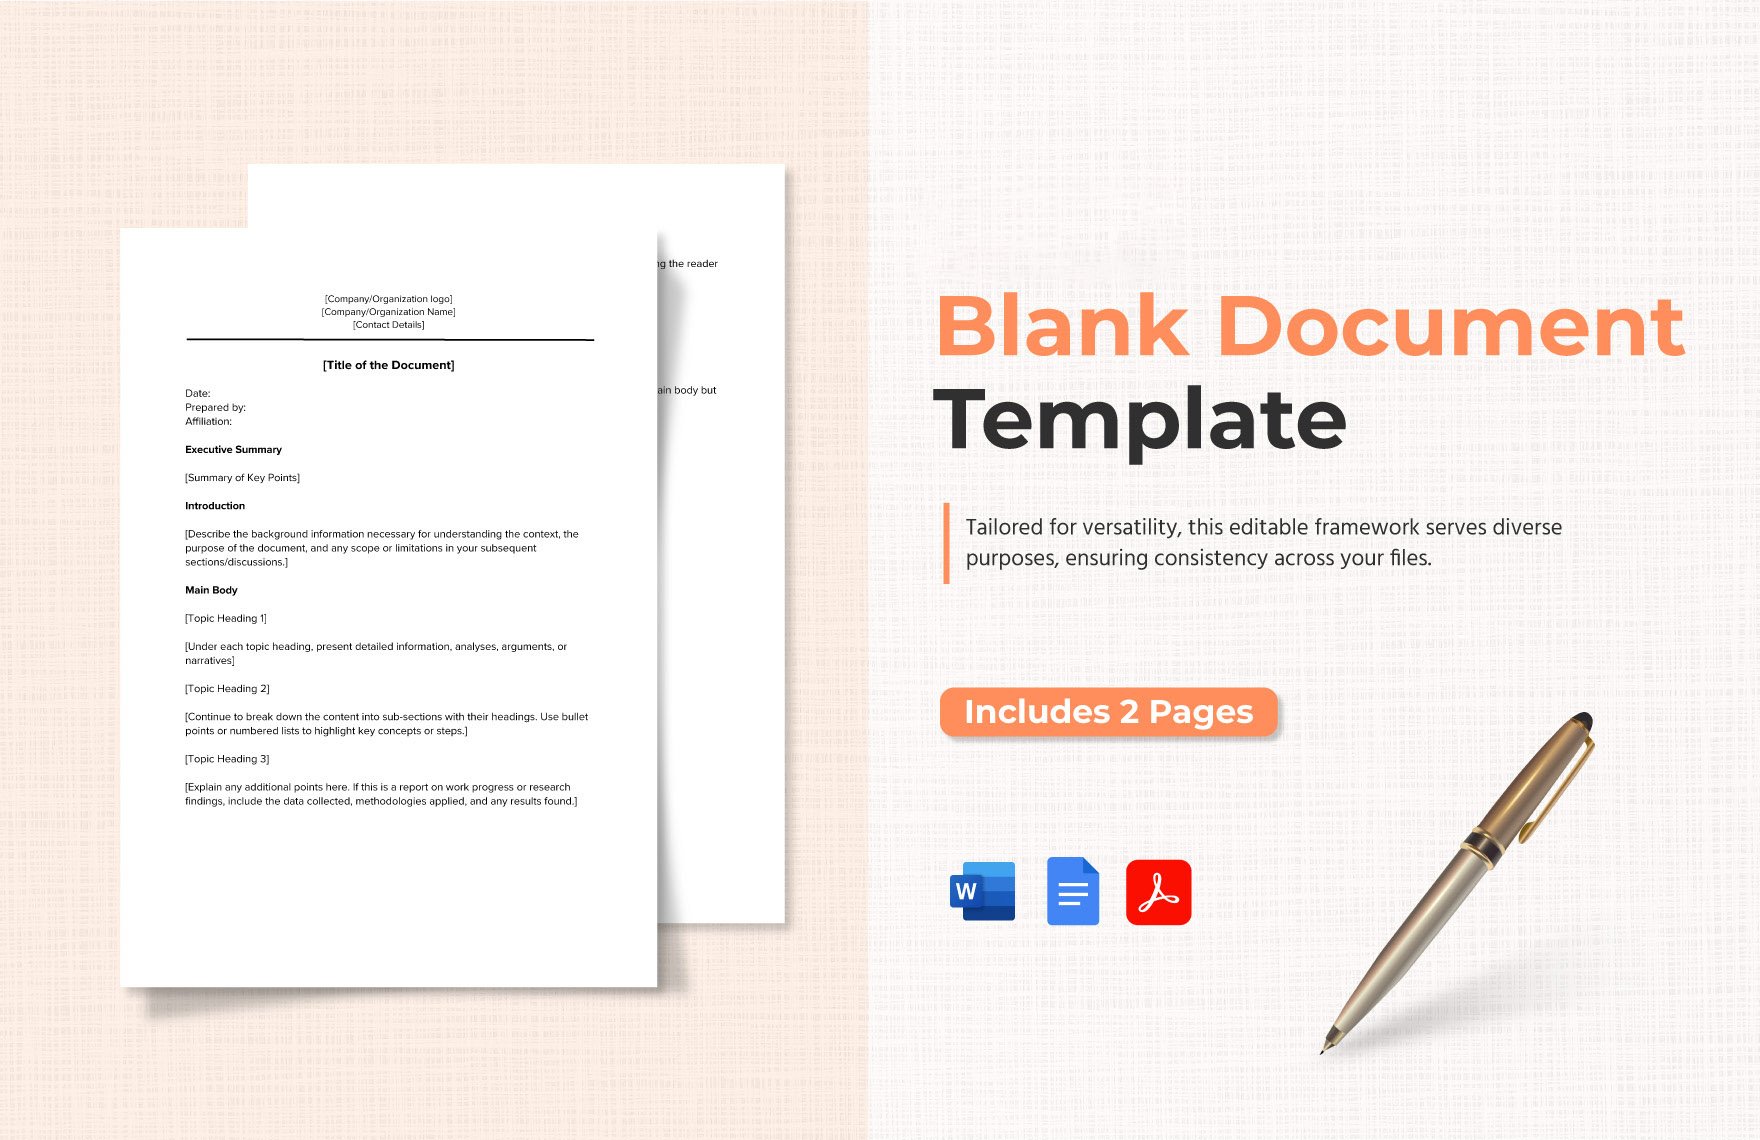 Free Blank Document Template in Word, Google Docs, PDF